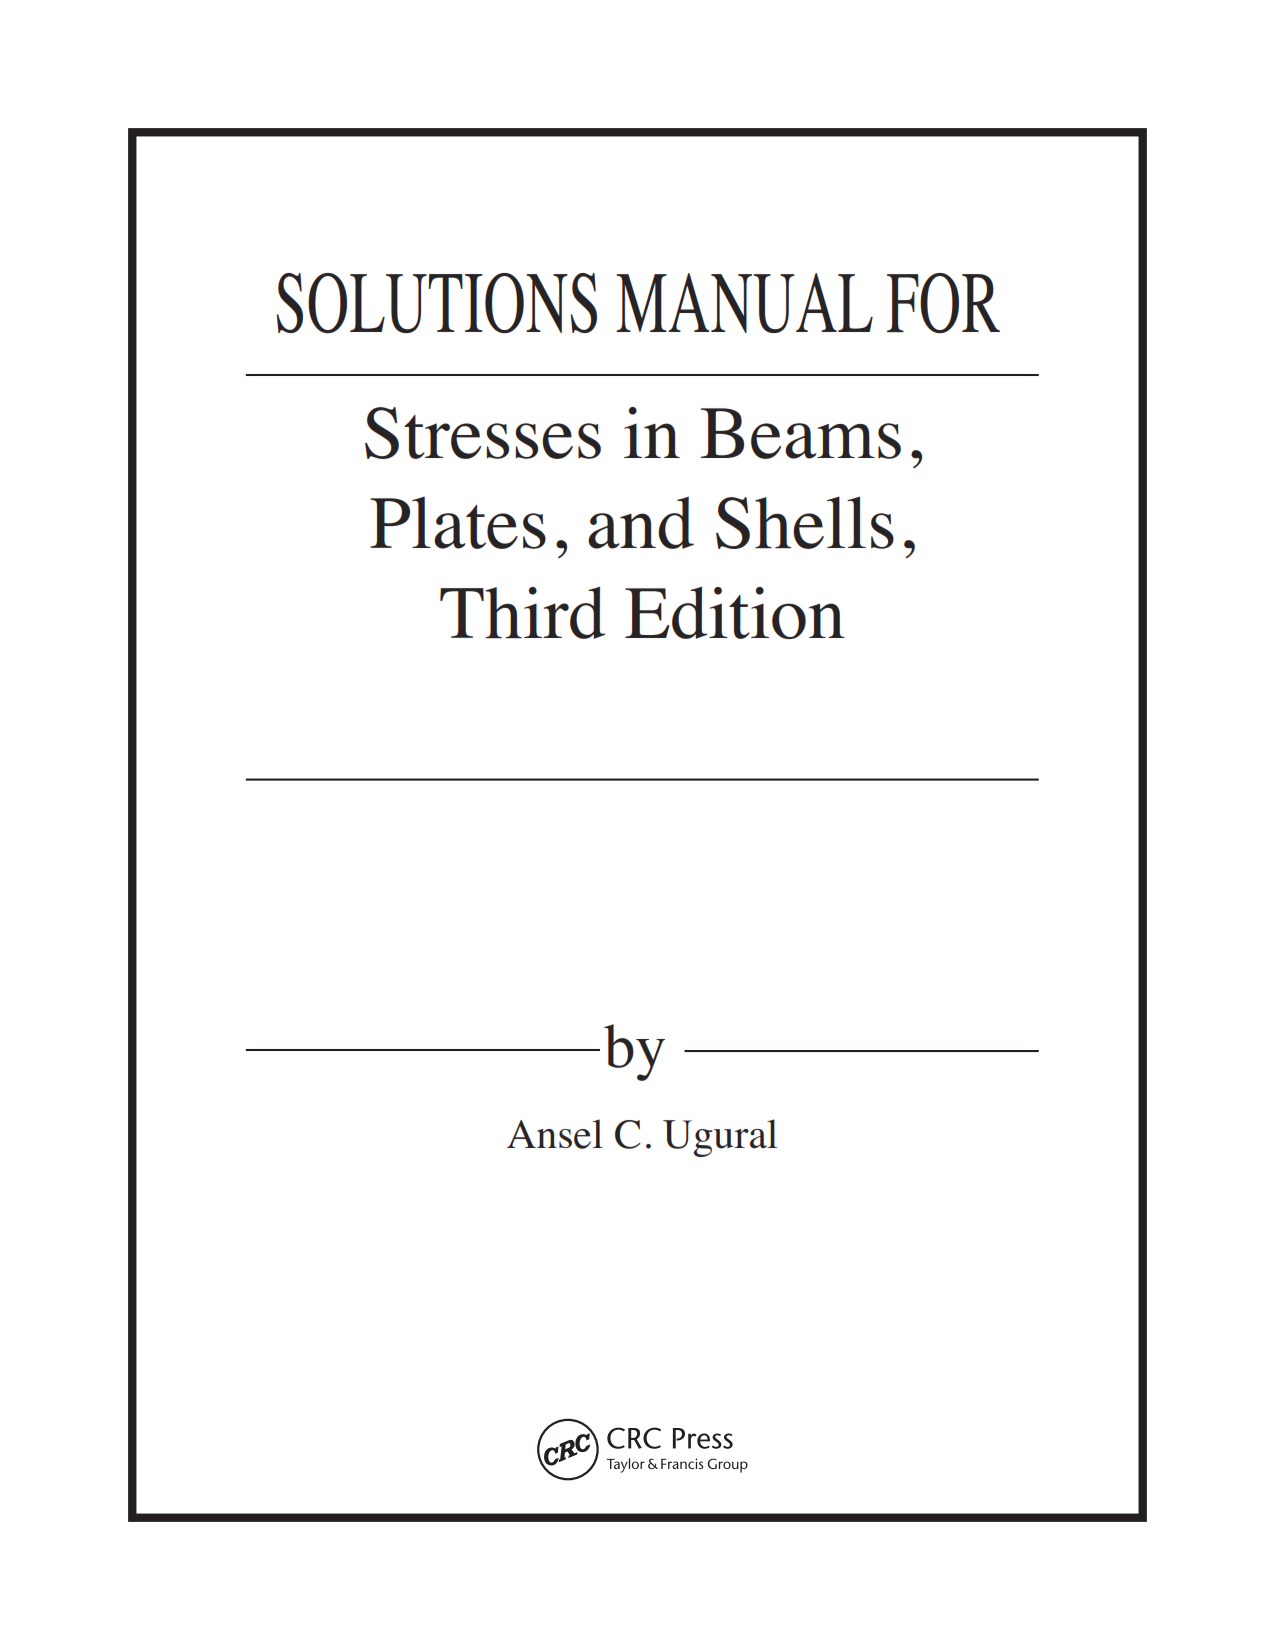 Download free Solution Manual for Stresses in Beams Plates and Shells 3rd edition written by Ugural Ansel eBook in pdf format